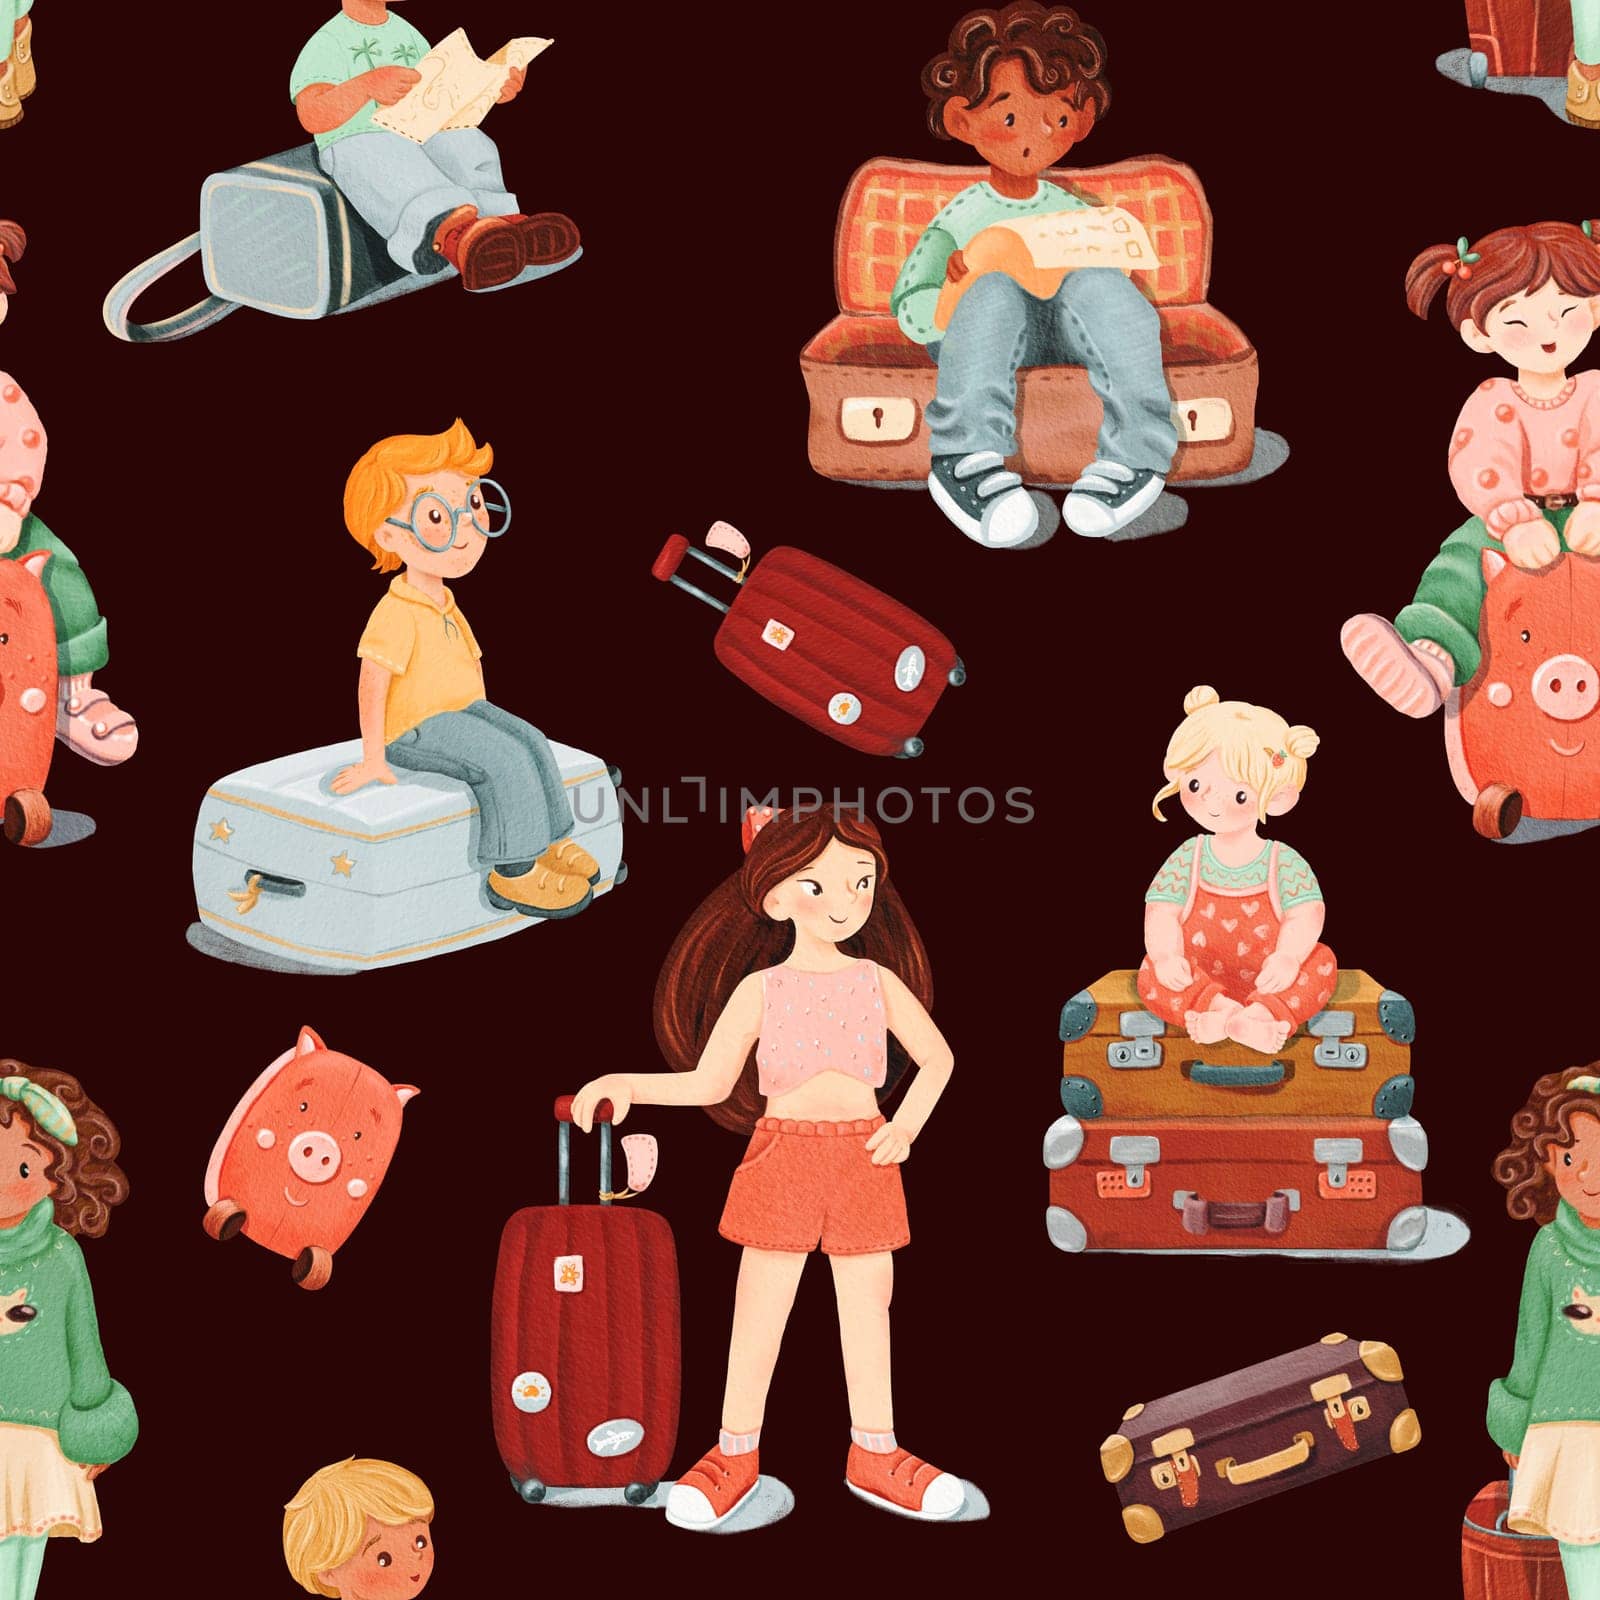 Seamless pattern of girl with luggage, a dark-skinned smiling girl, boy sits in open empty brown retro suitcase. Surprised looks at the todolist. travel concept. watercolor illustration of a teenager.